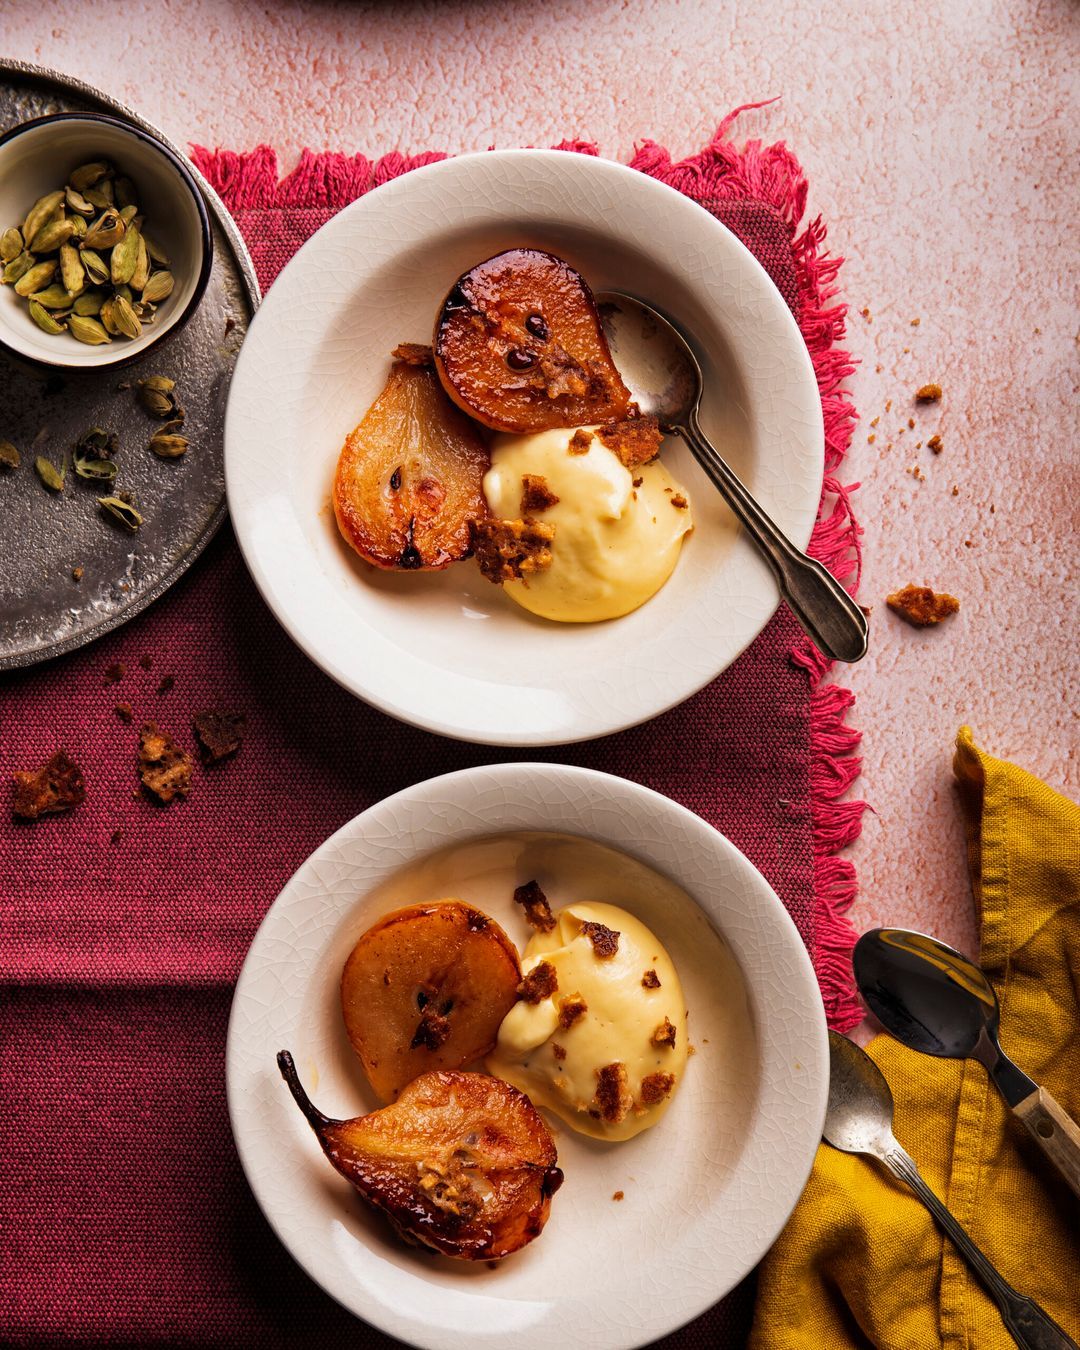 Roasted pears with cardamom mustard and chat heads